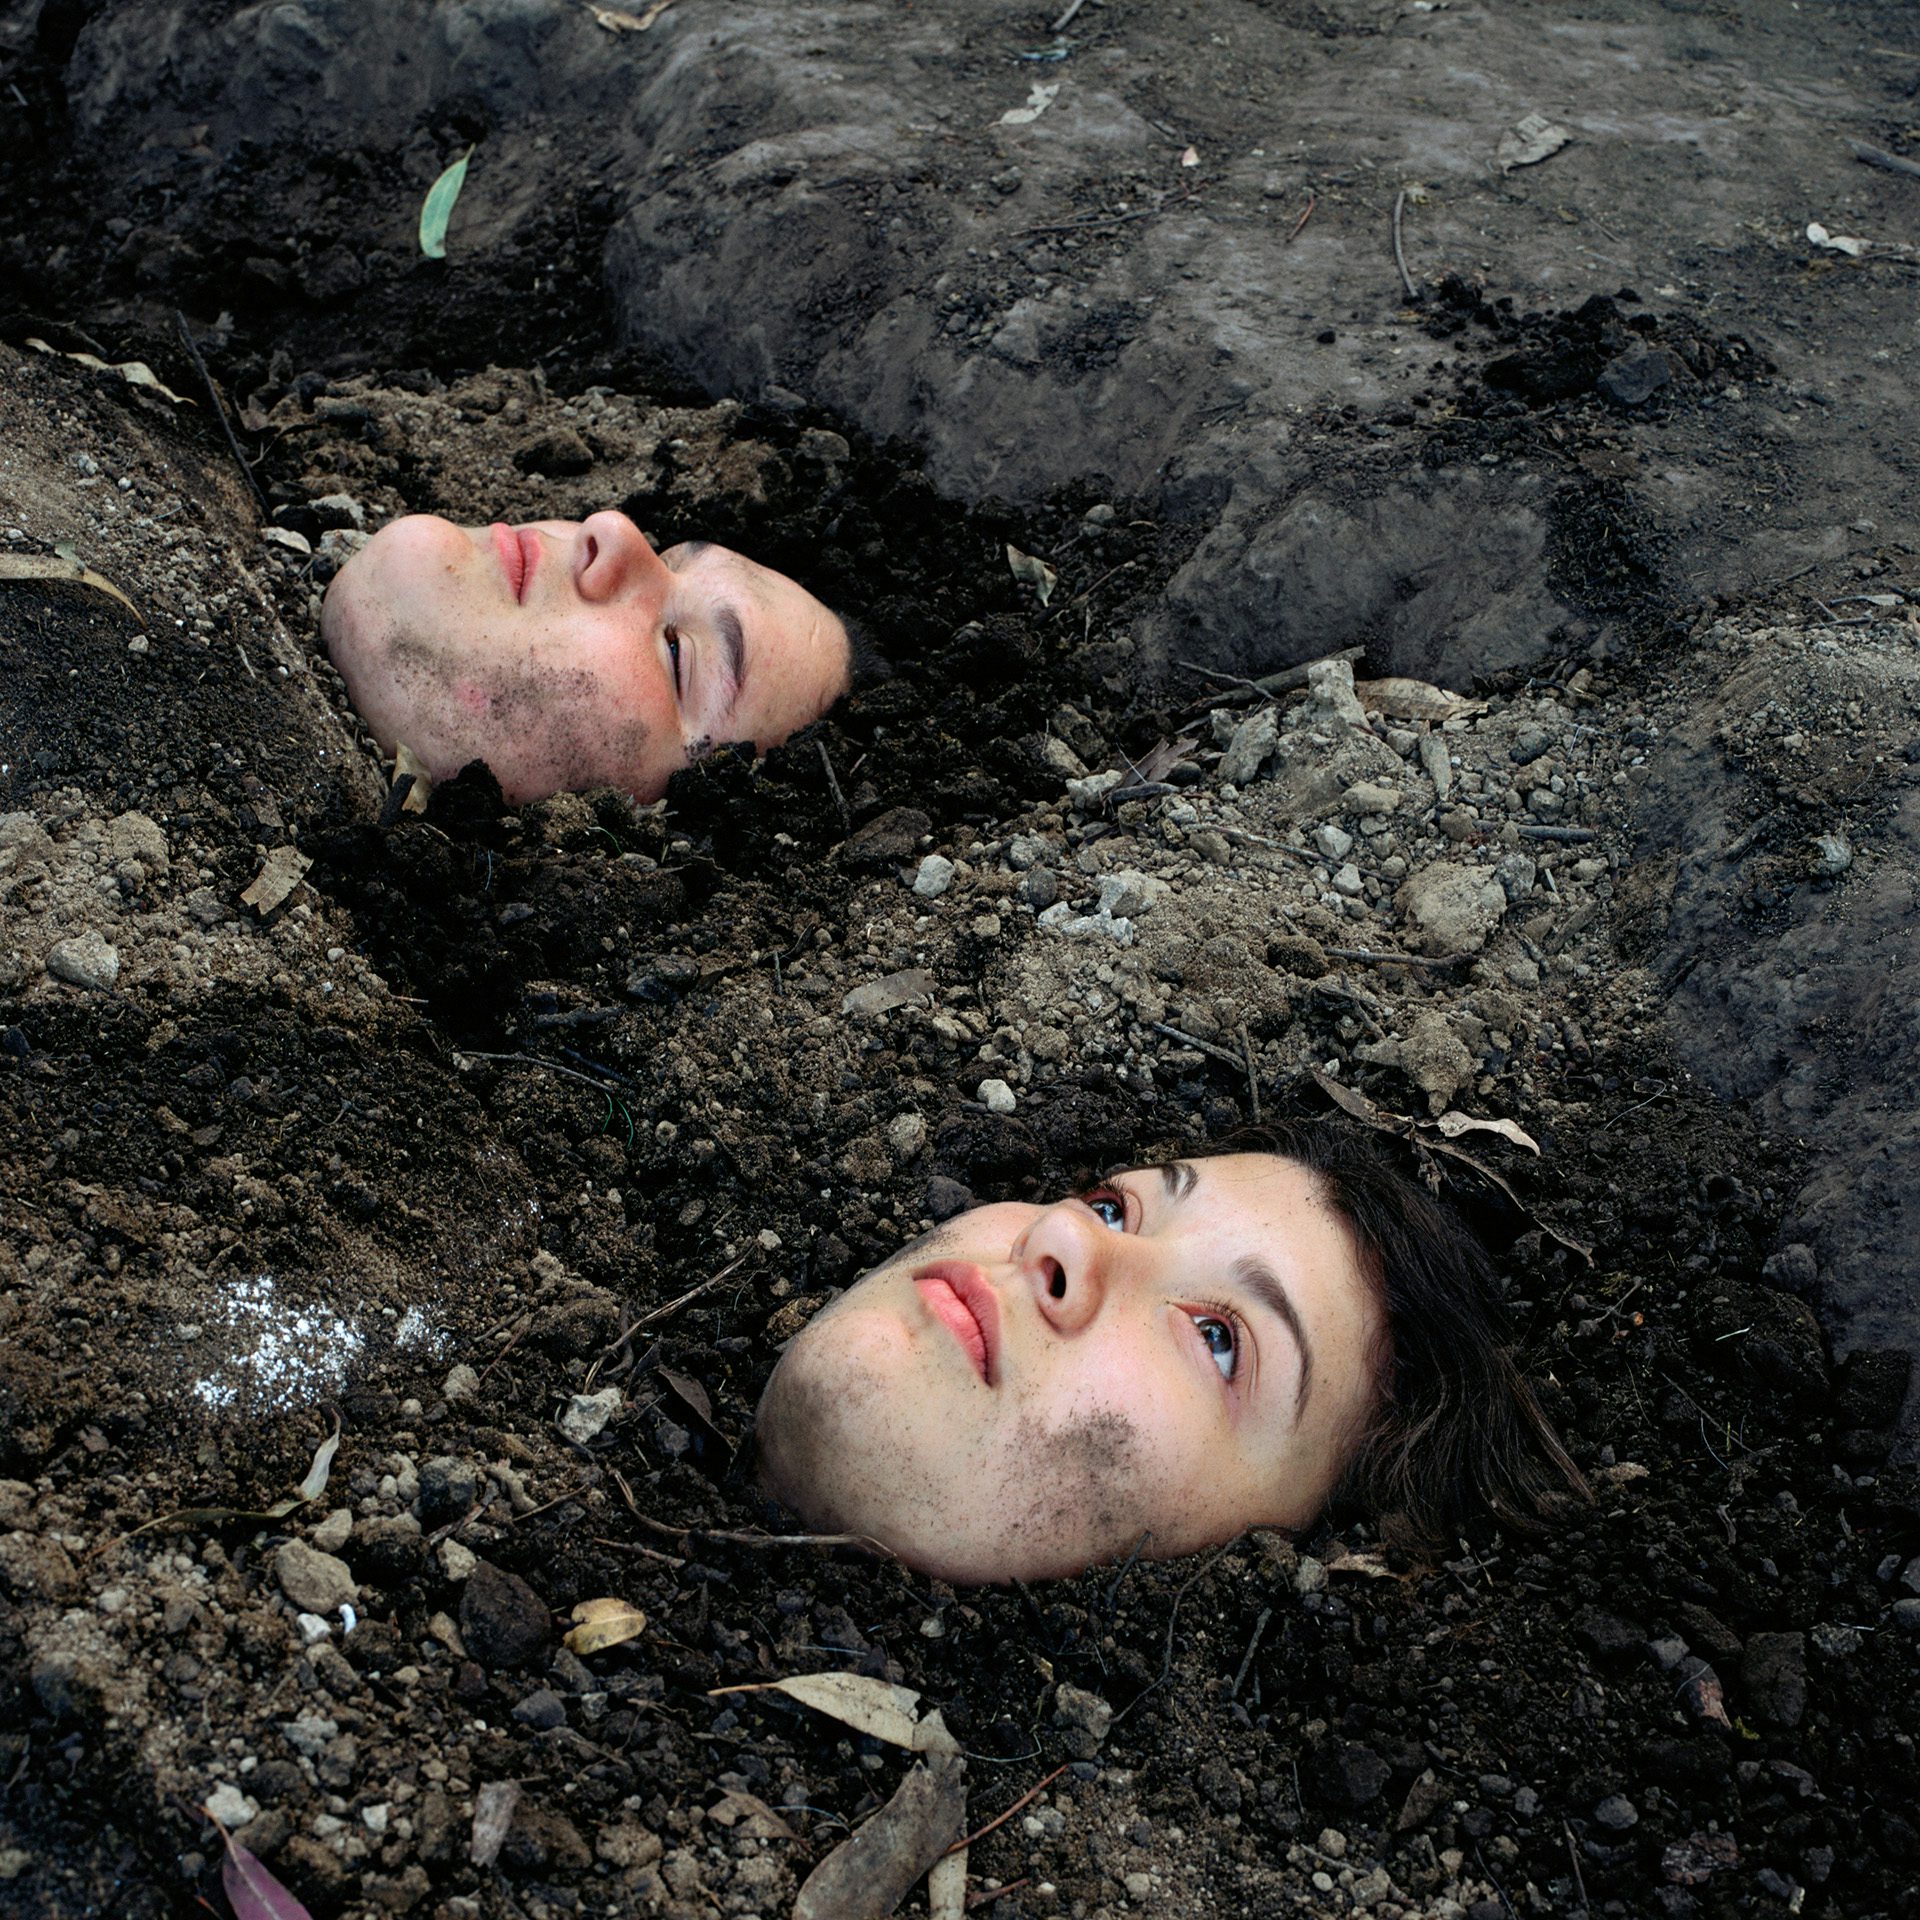 Photograph by Alessandra Sanguinetti of two girls buried in dirt with only their heads showing as they look above them